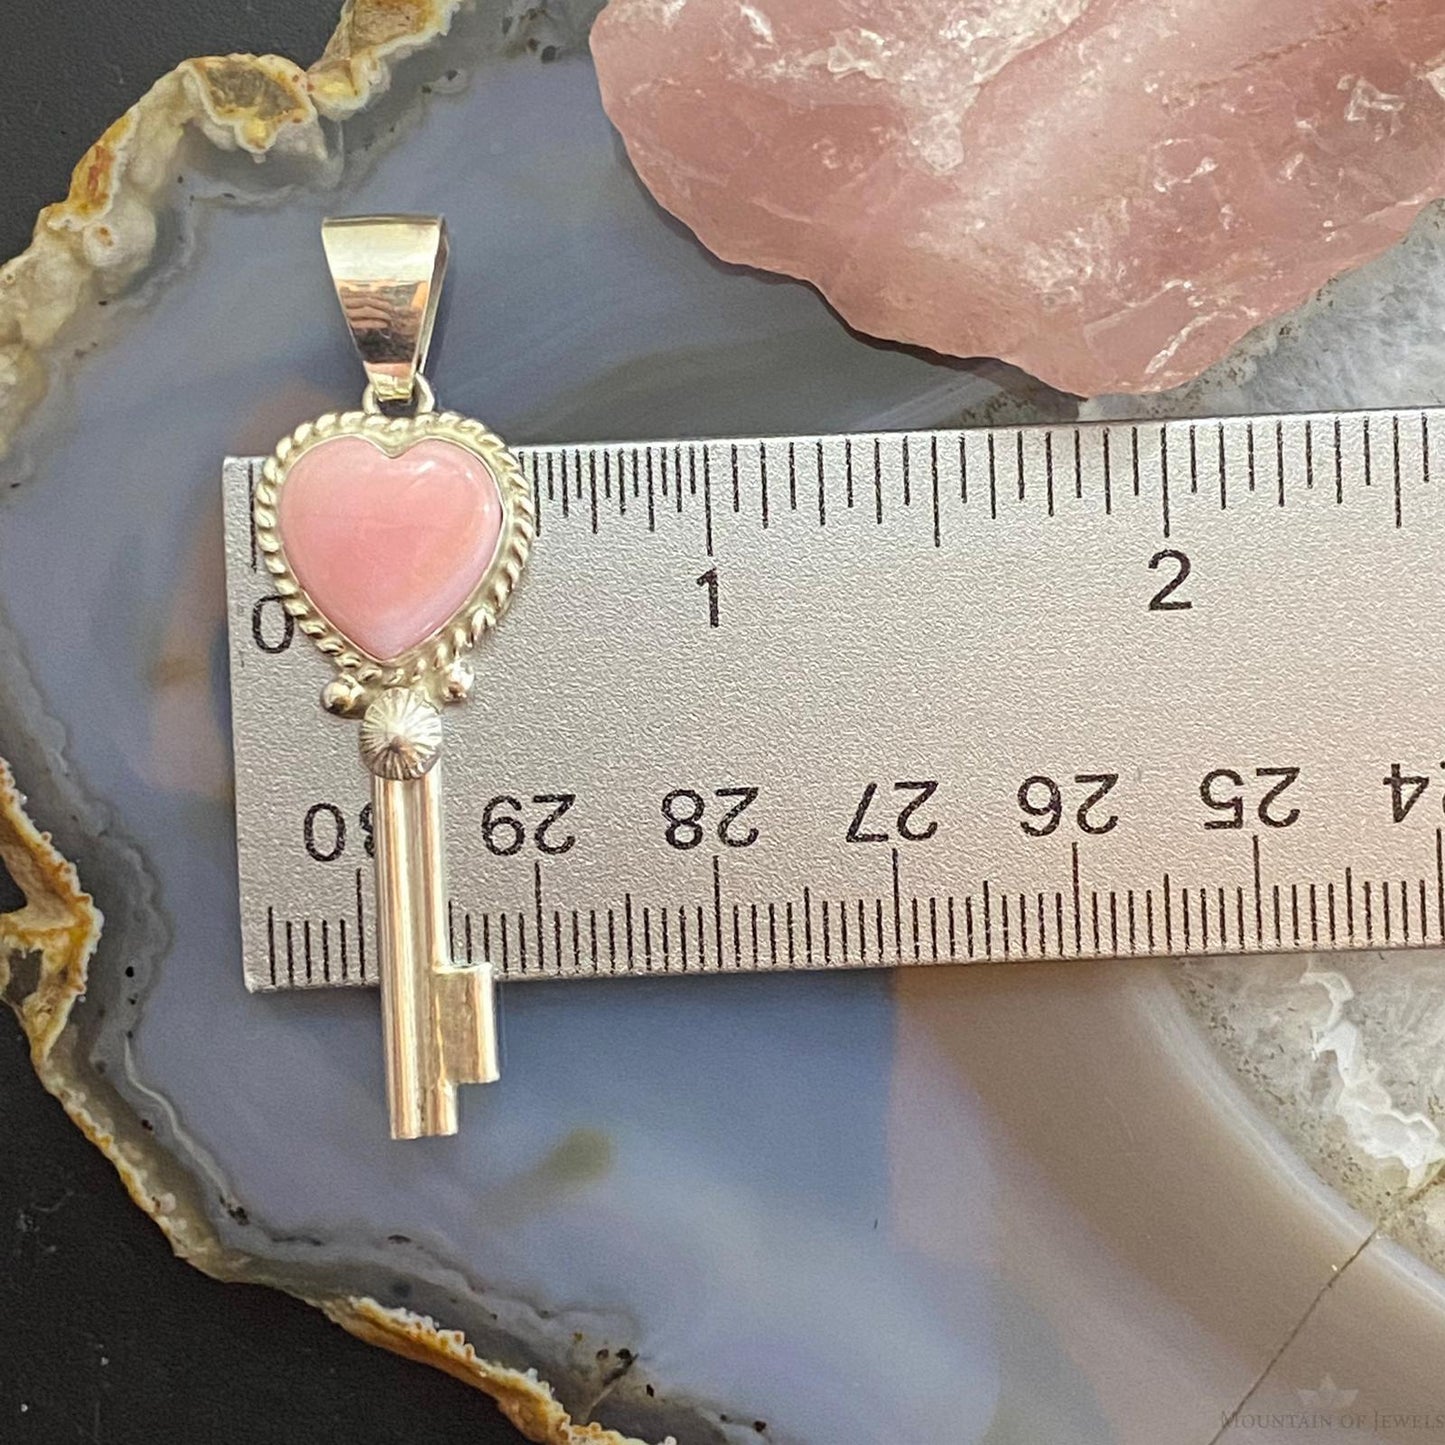 P. Skeets Native American Sterling Silver Pink Conch Shell Heart Key Pendant For Women